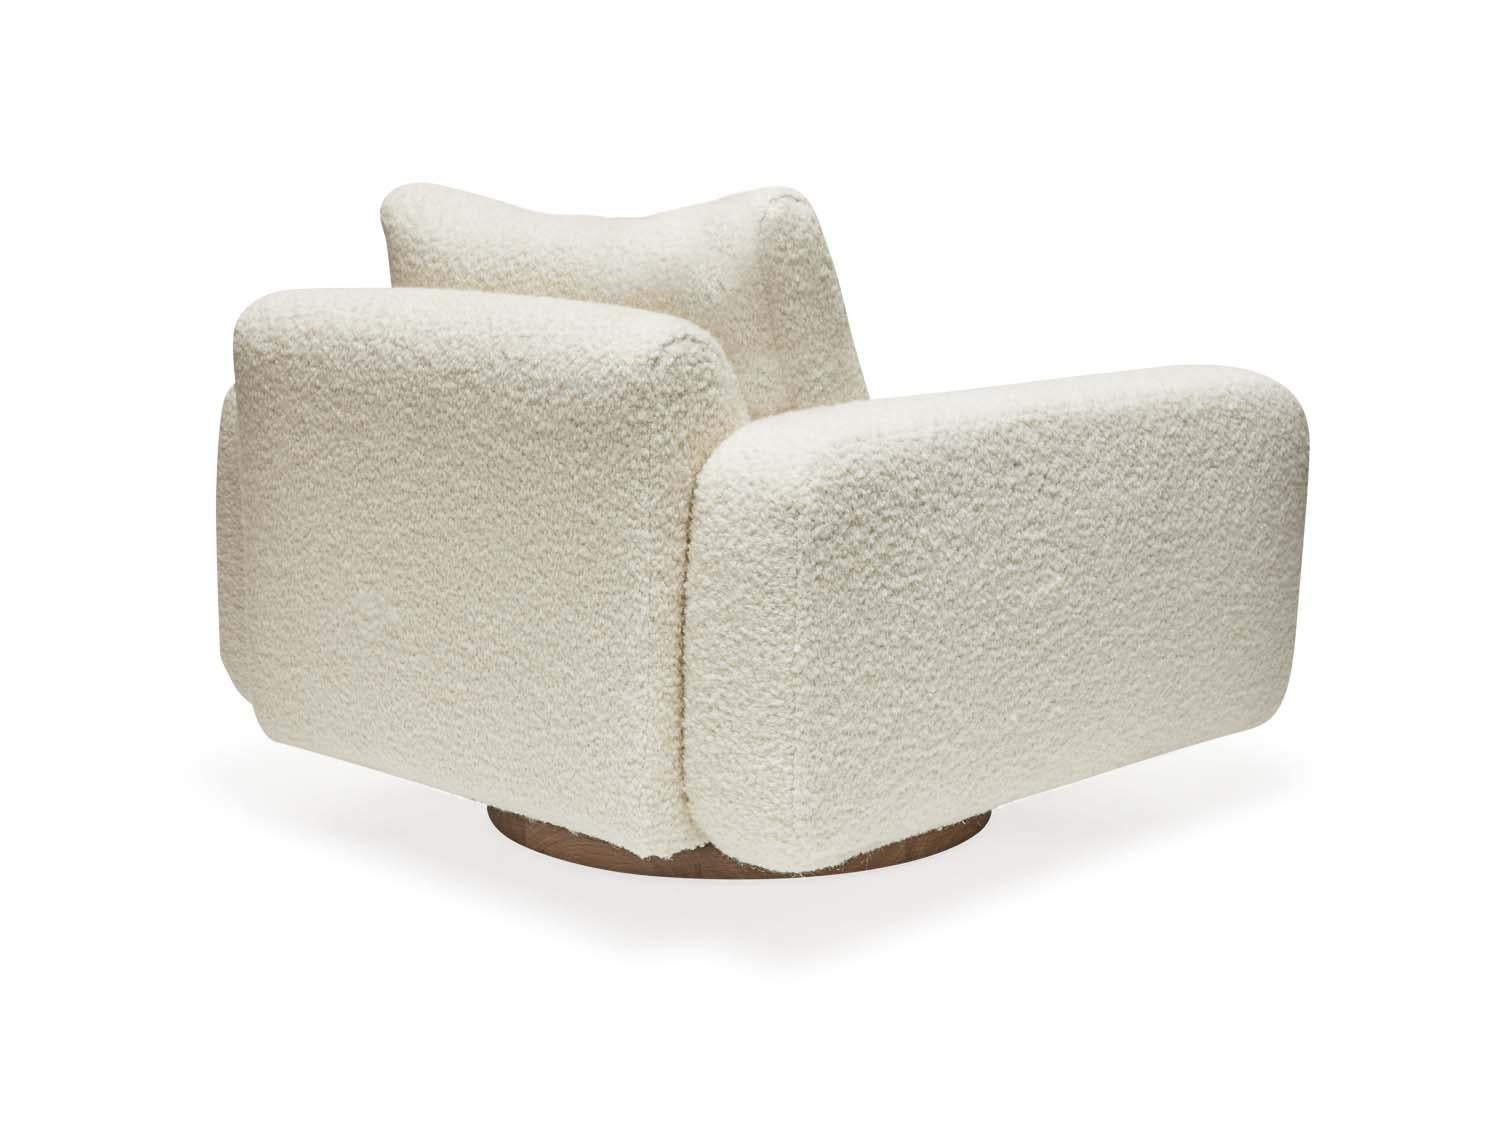 Mesa Swivel Chair by Lawson-Fenning in White Alpaca Boucle. The Mesa swivel chair is a fully upholstered club chair that features a walnut or oak inset base.

The Lawson-Fenning Collection is designed and handmade in Los Angeles, California.
 